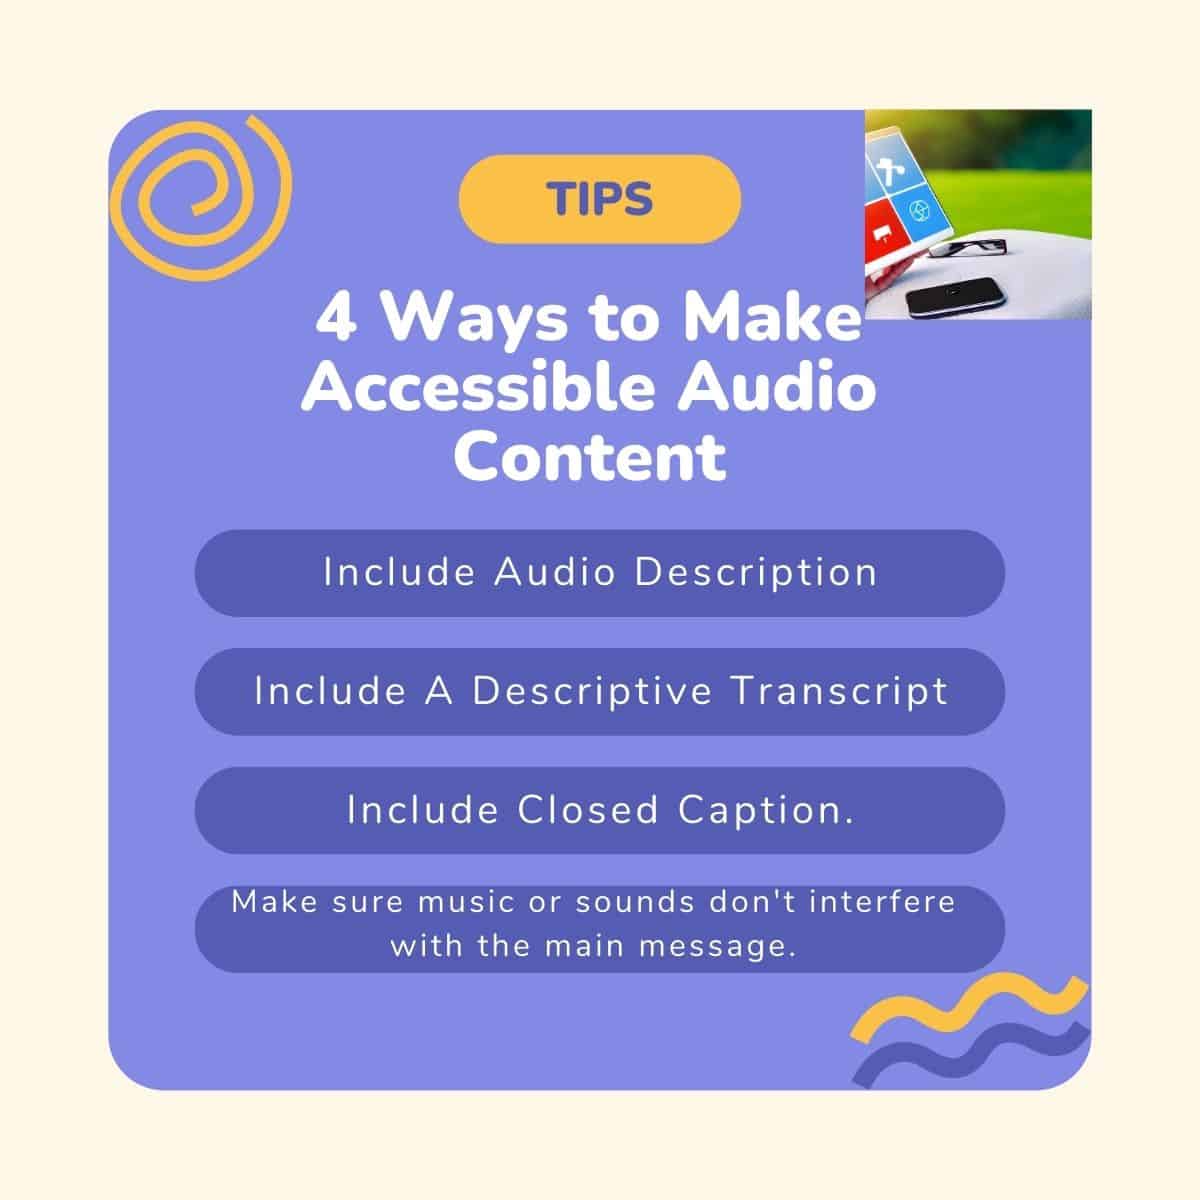 114 Accessible Audio Tips